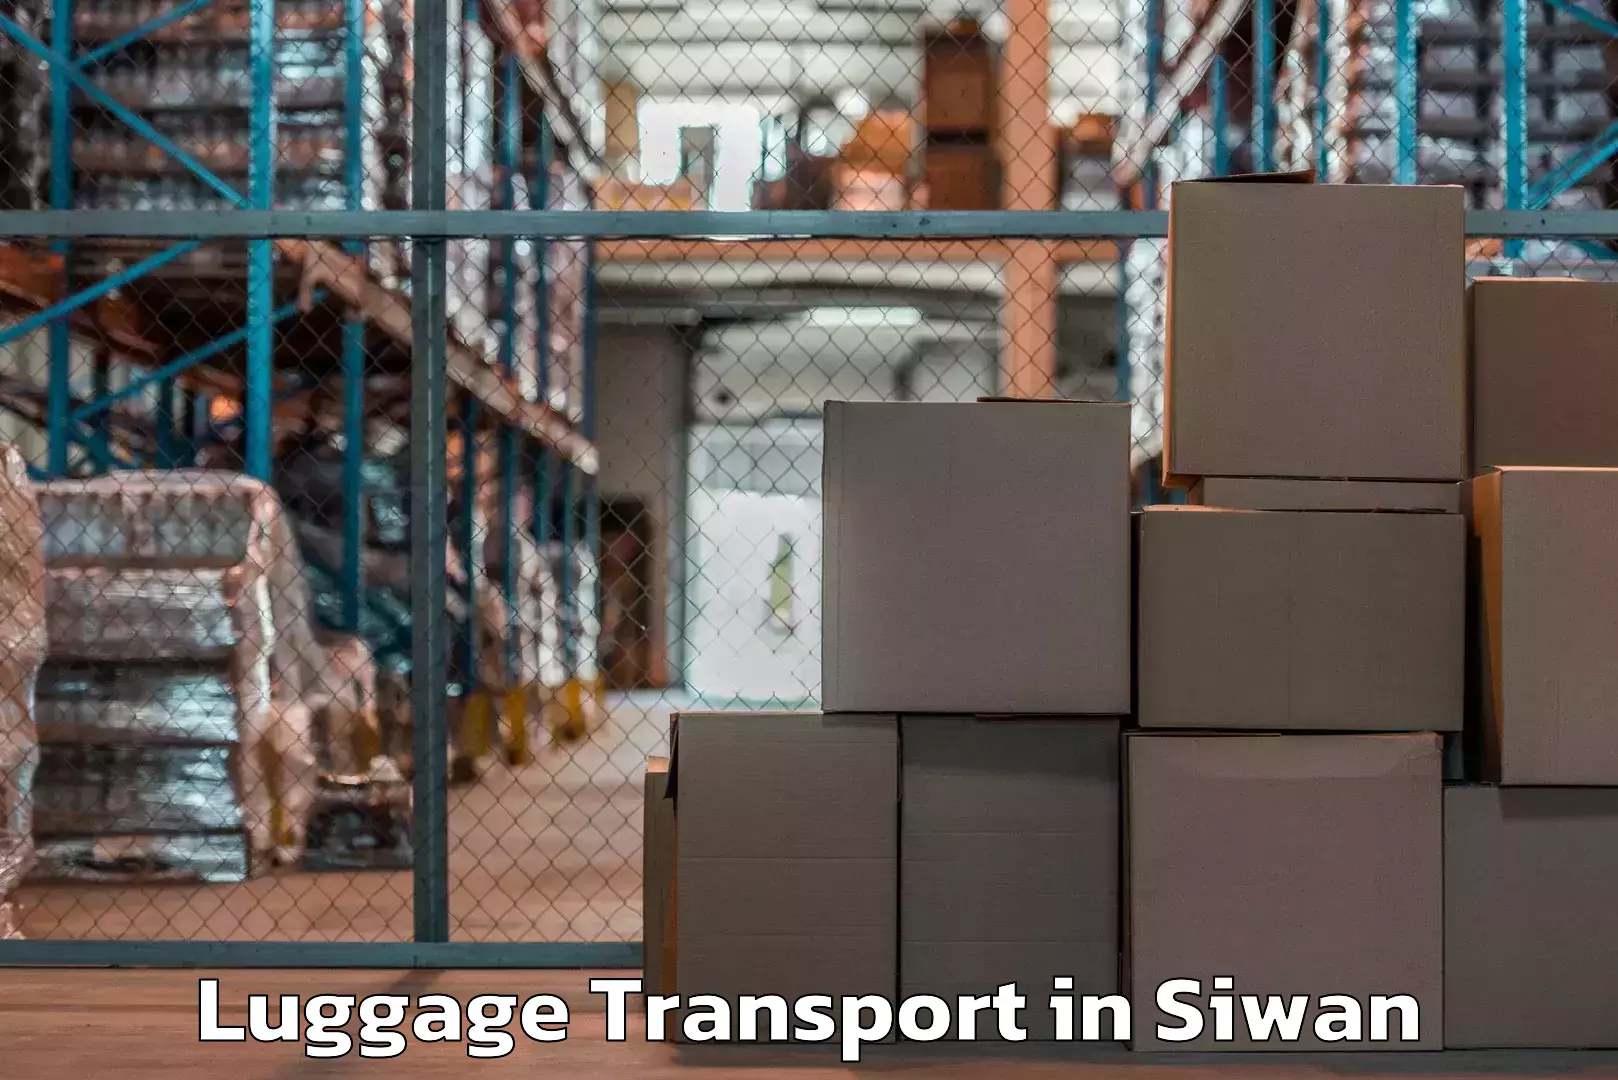 Luggage storage and delivery in Siwan